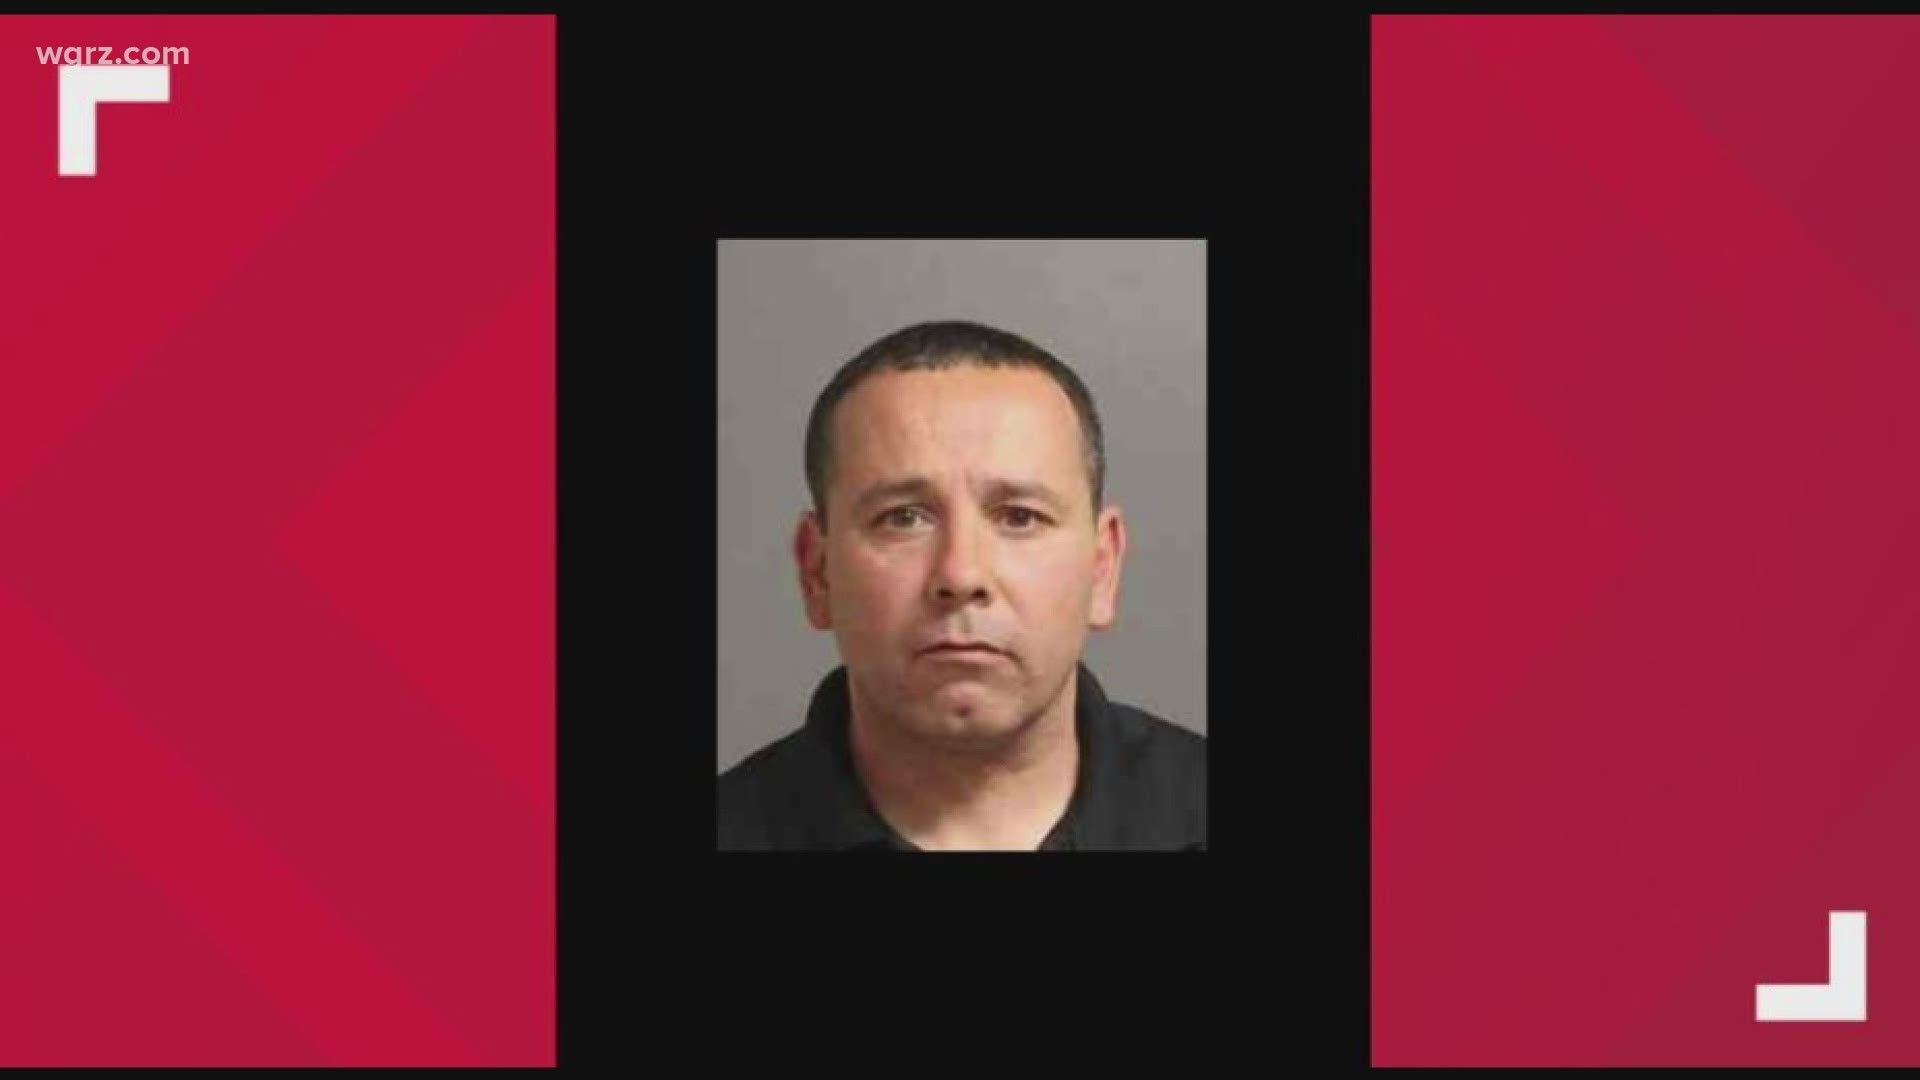 THEY HAVE LOCATED AND ARRESTED THIS MAN -
 49-YEAR-OLD JOEL ANZALONE.